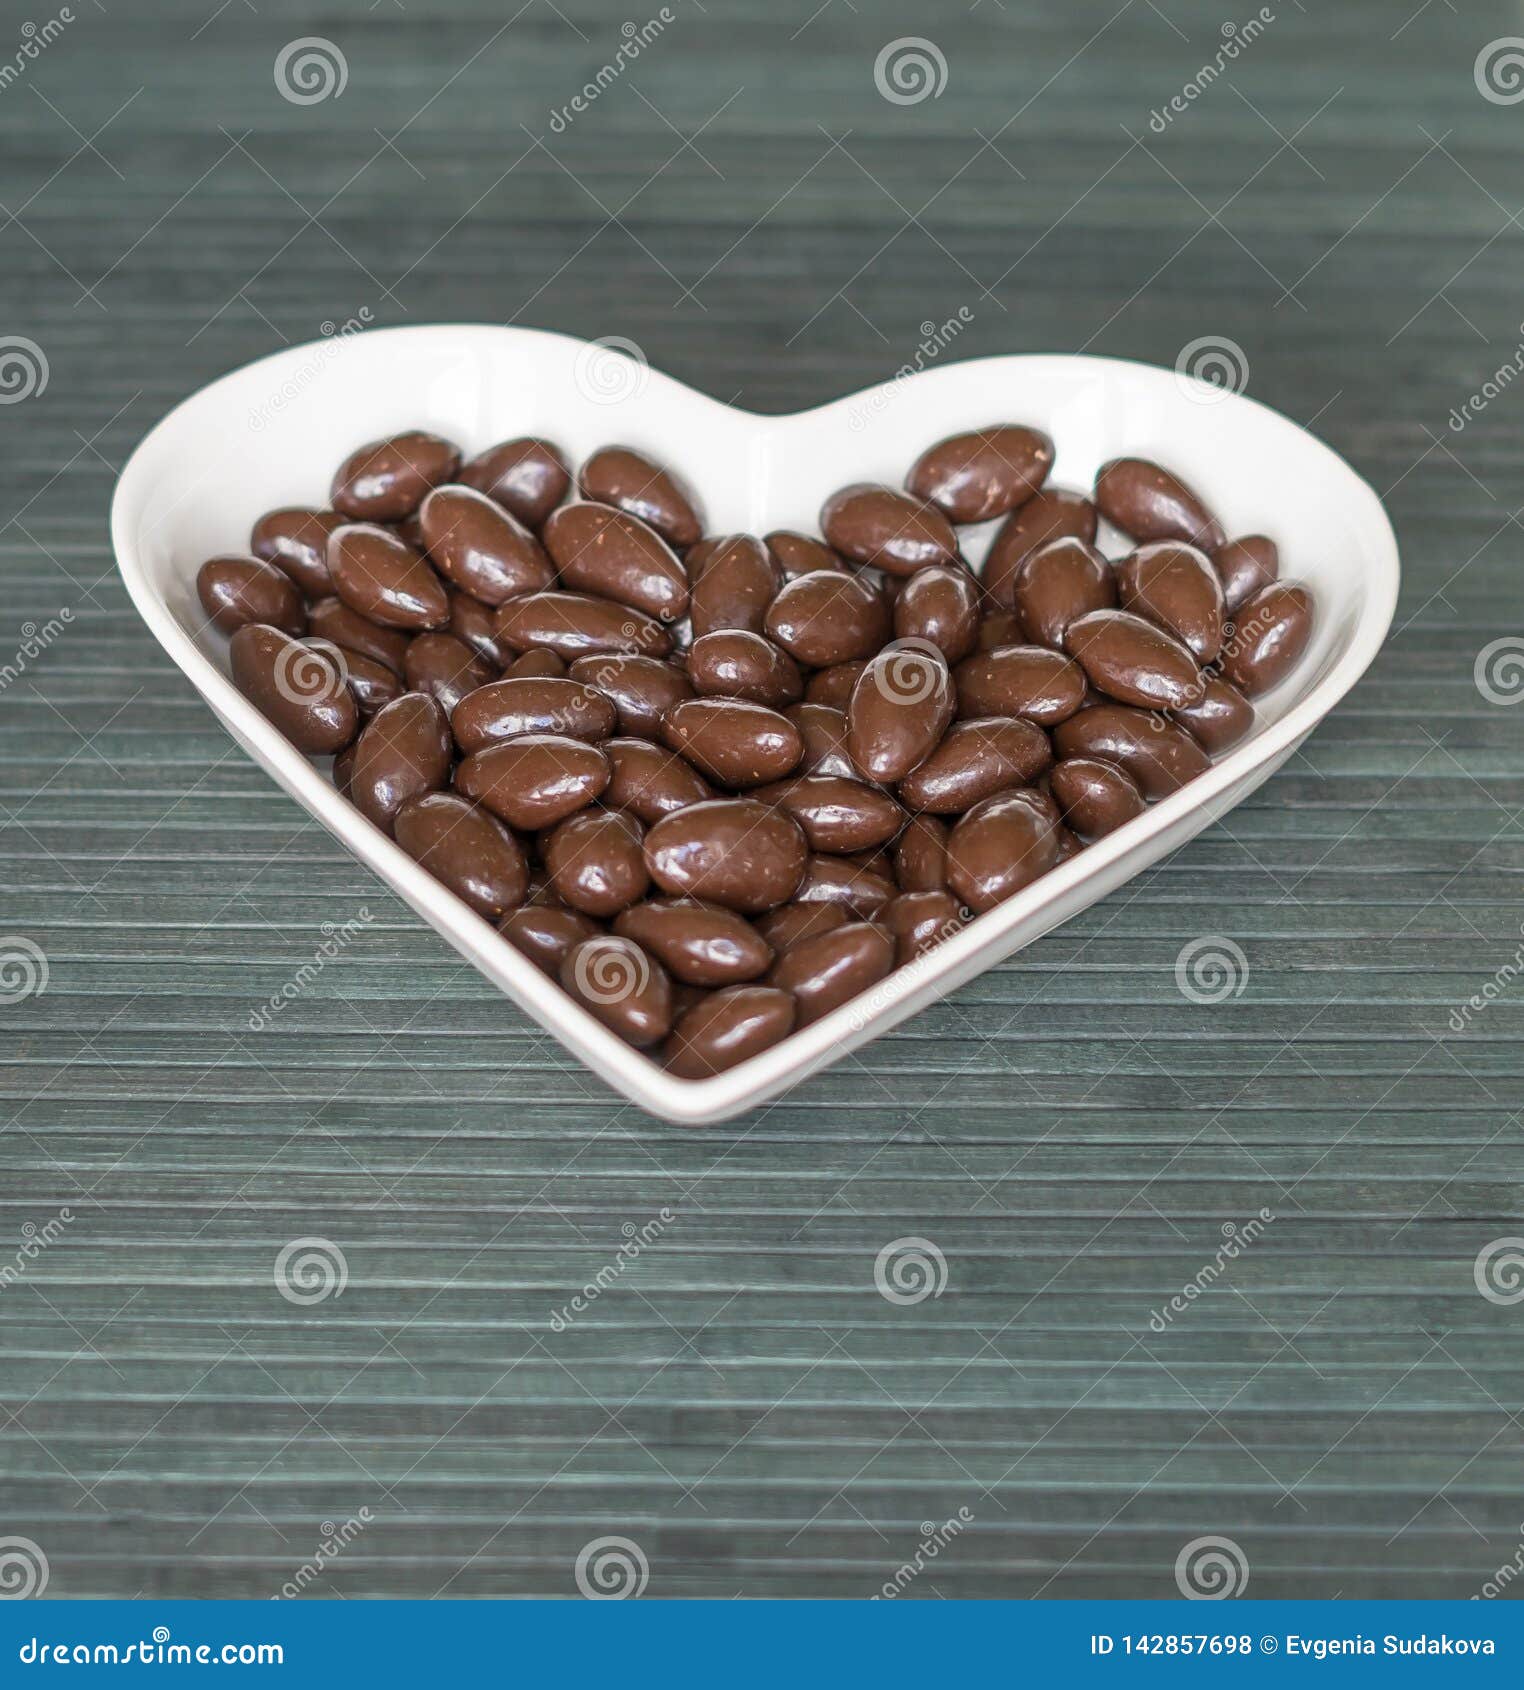 Nuts arranged in heart shape on background. Food image close up candy, chocolate milk, extra dark almond nuts. Love Texture.